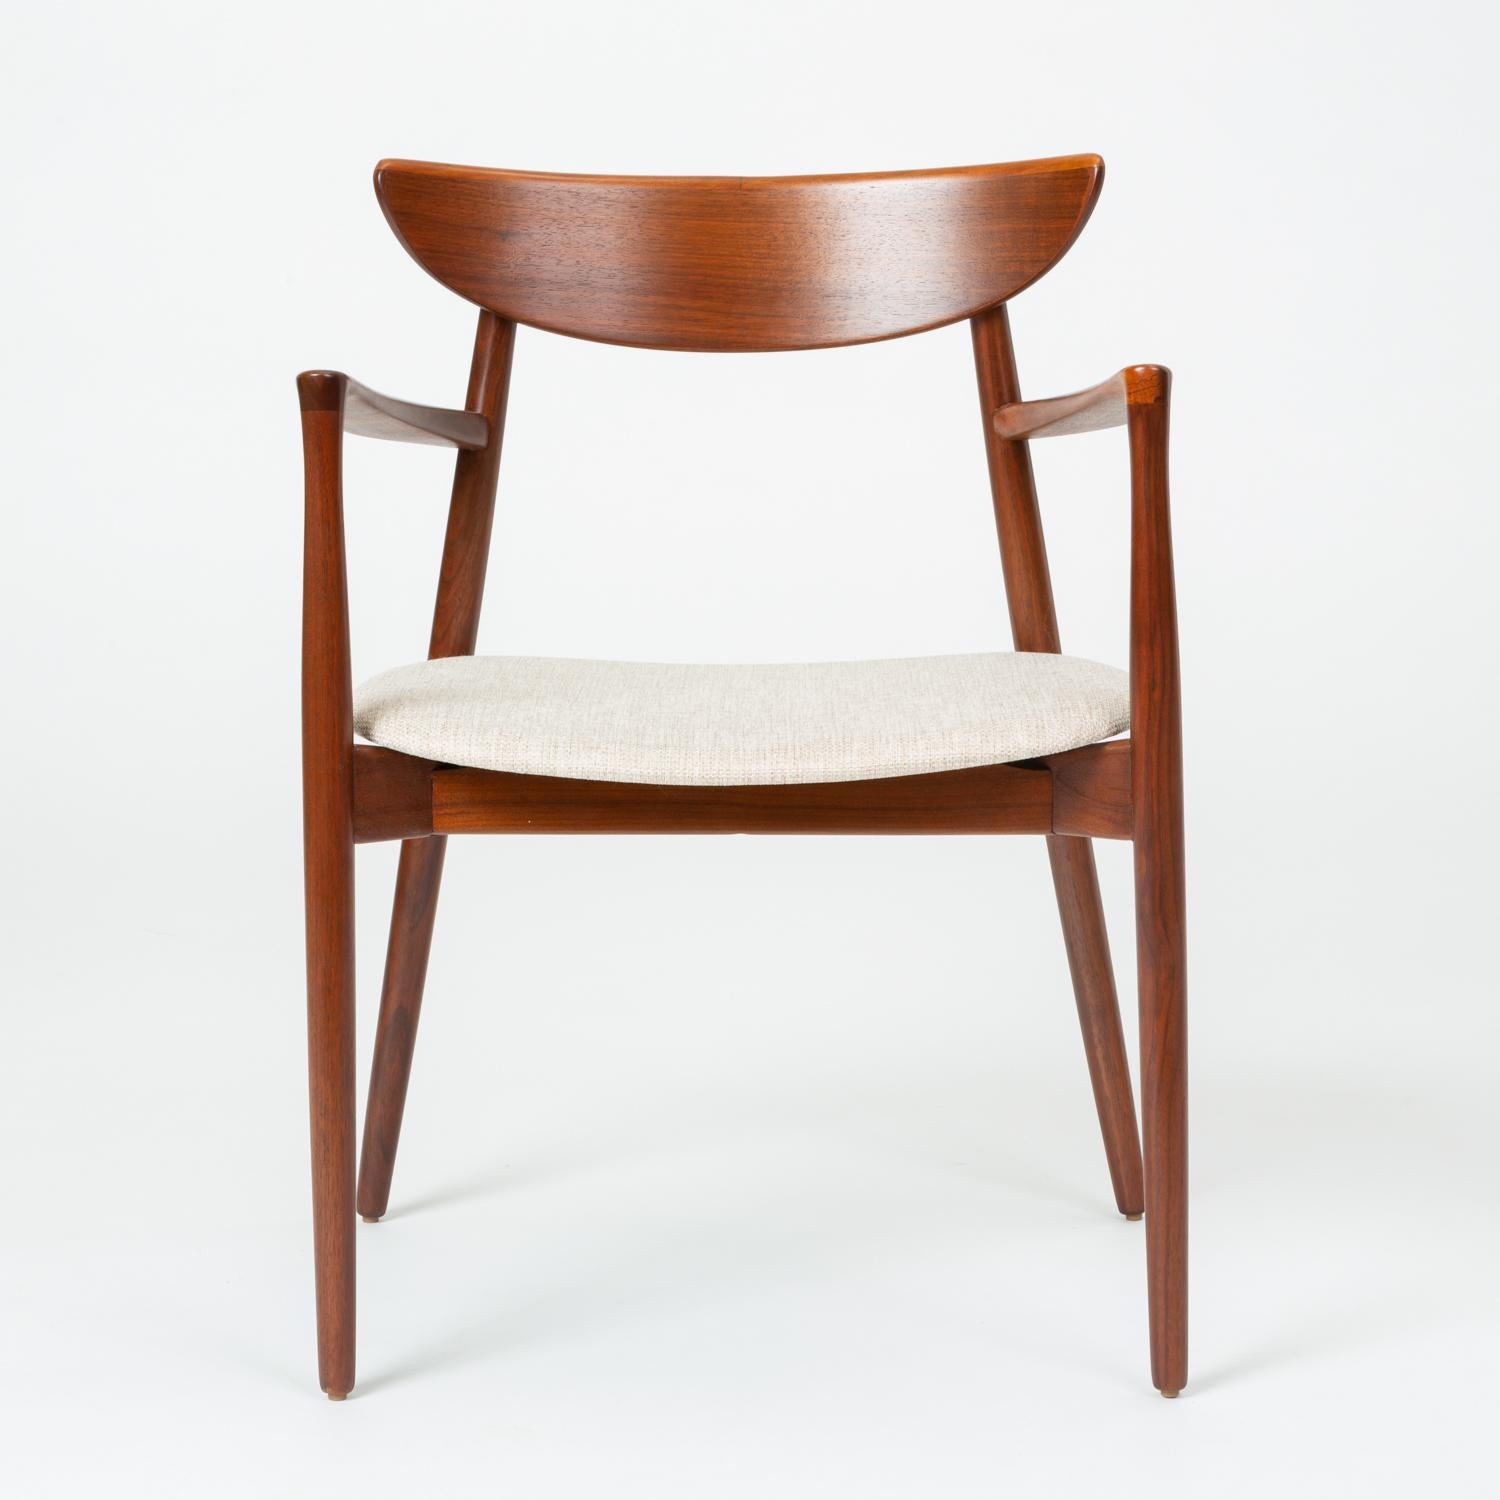 Designed circa 1960 by Harry Østergaard, this set of dining chairs includes two arm chairs and two side chairs. Manufactured in Denmark by Randers Møbelfabrik, the chairs were imported, like many other Randers designs, by the Long Beach-based